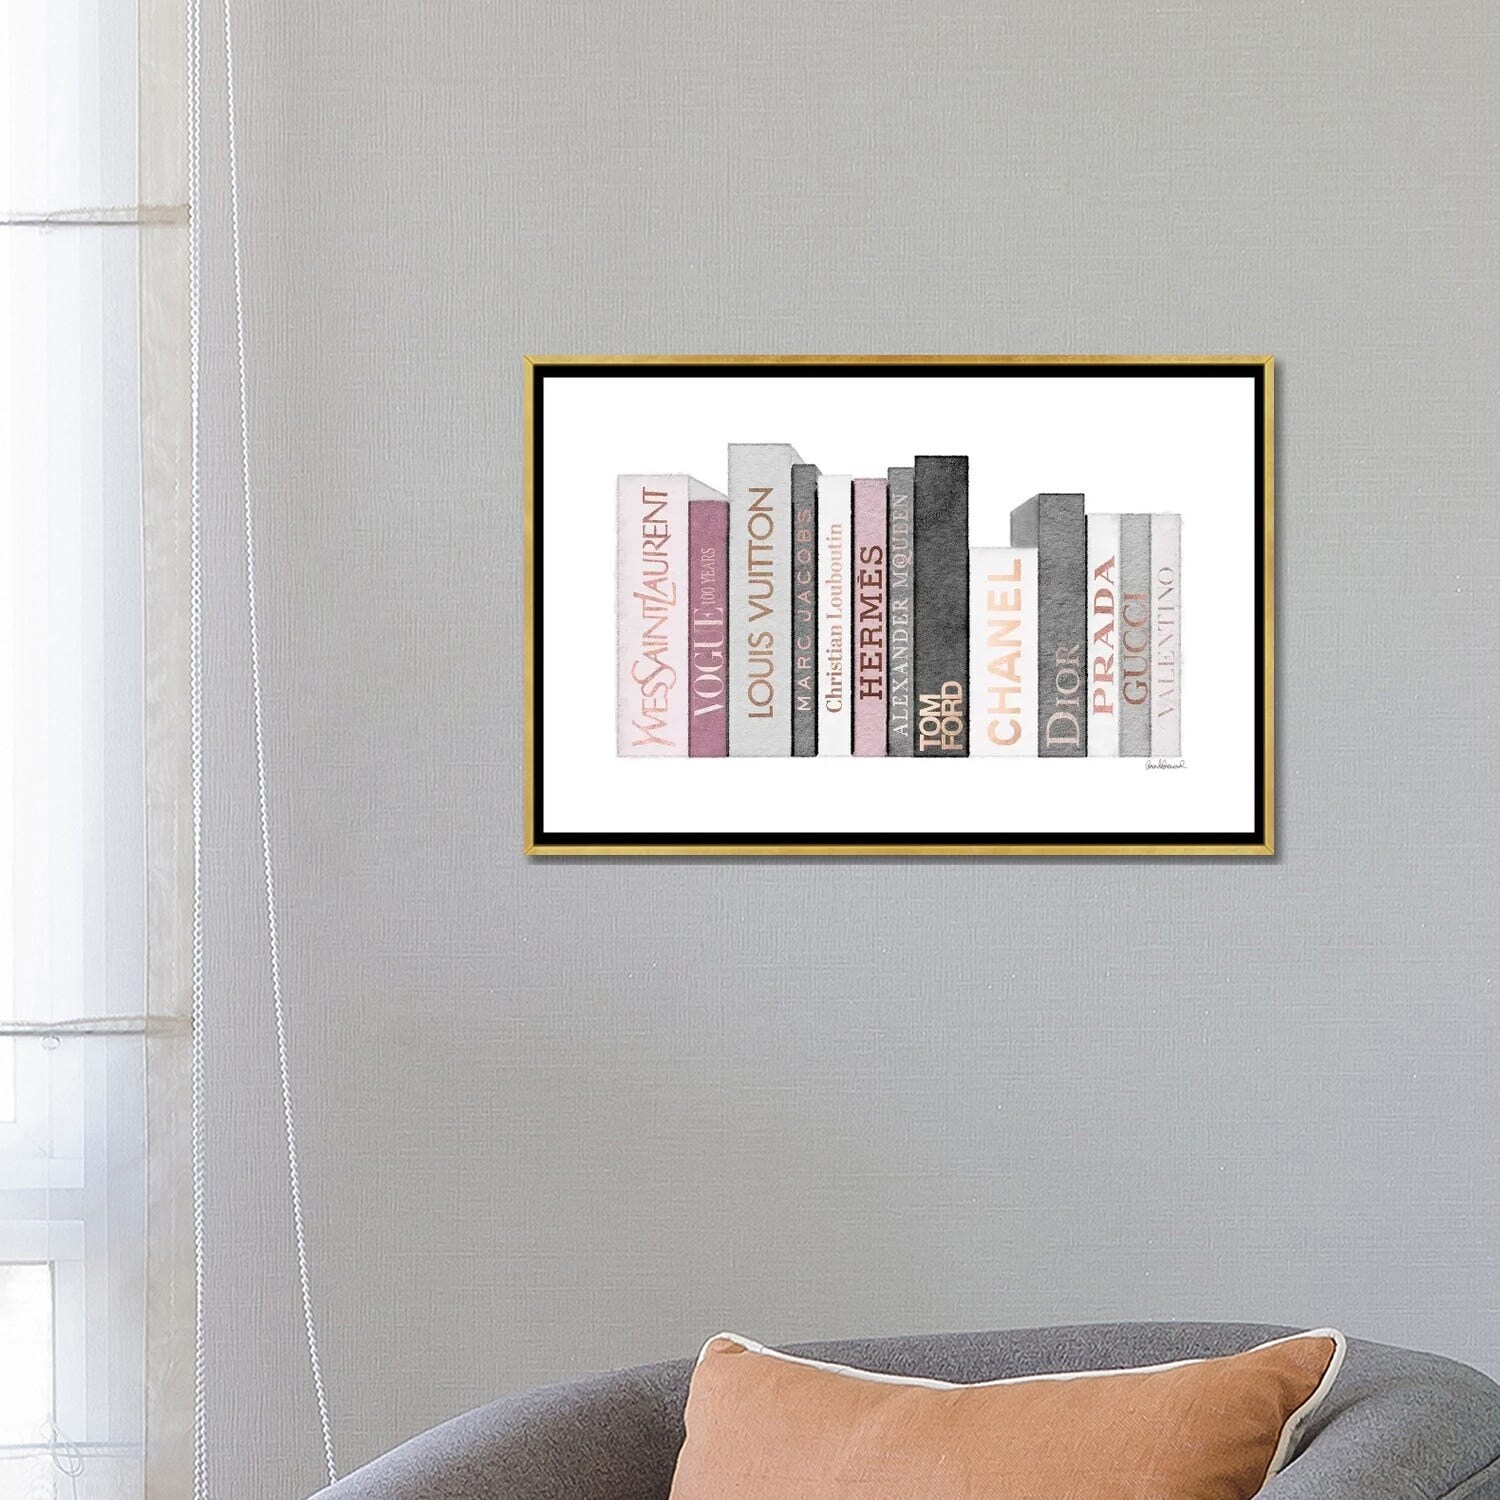  Fine Art Canvas Book Shelf Full Of Rose Gold, Grey, And Pink  Fashion Books Canvas Wall Decor by Artist Amanda Greenwood for Living Room,  Bedroom, Bathroom, Kitchen, Office, Bar, Dining 